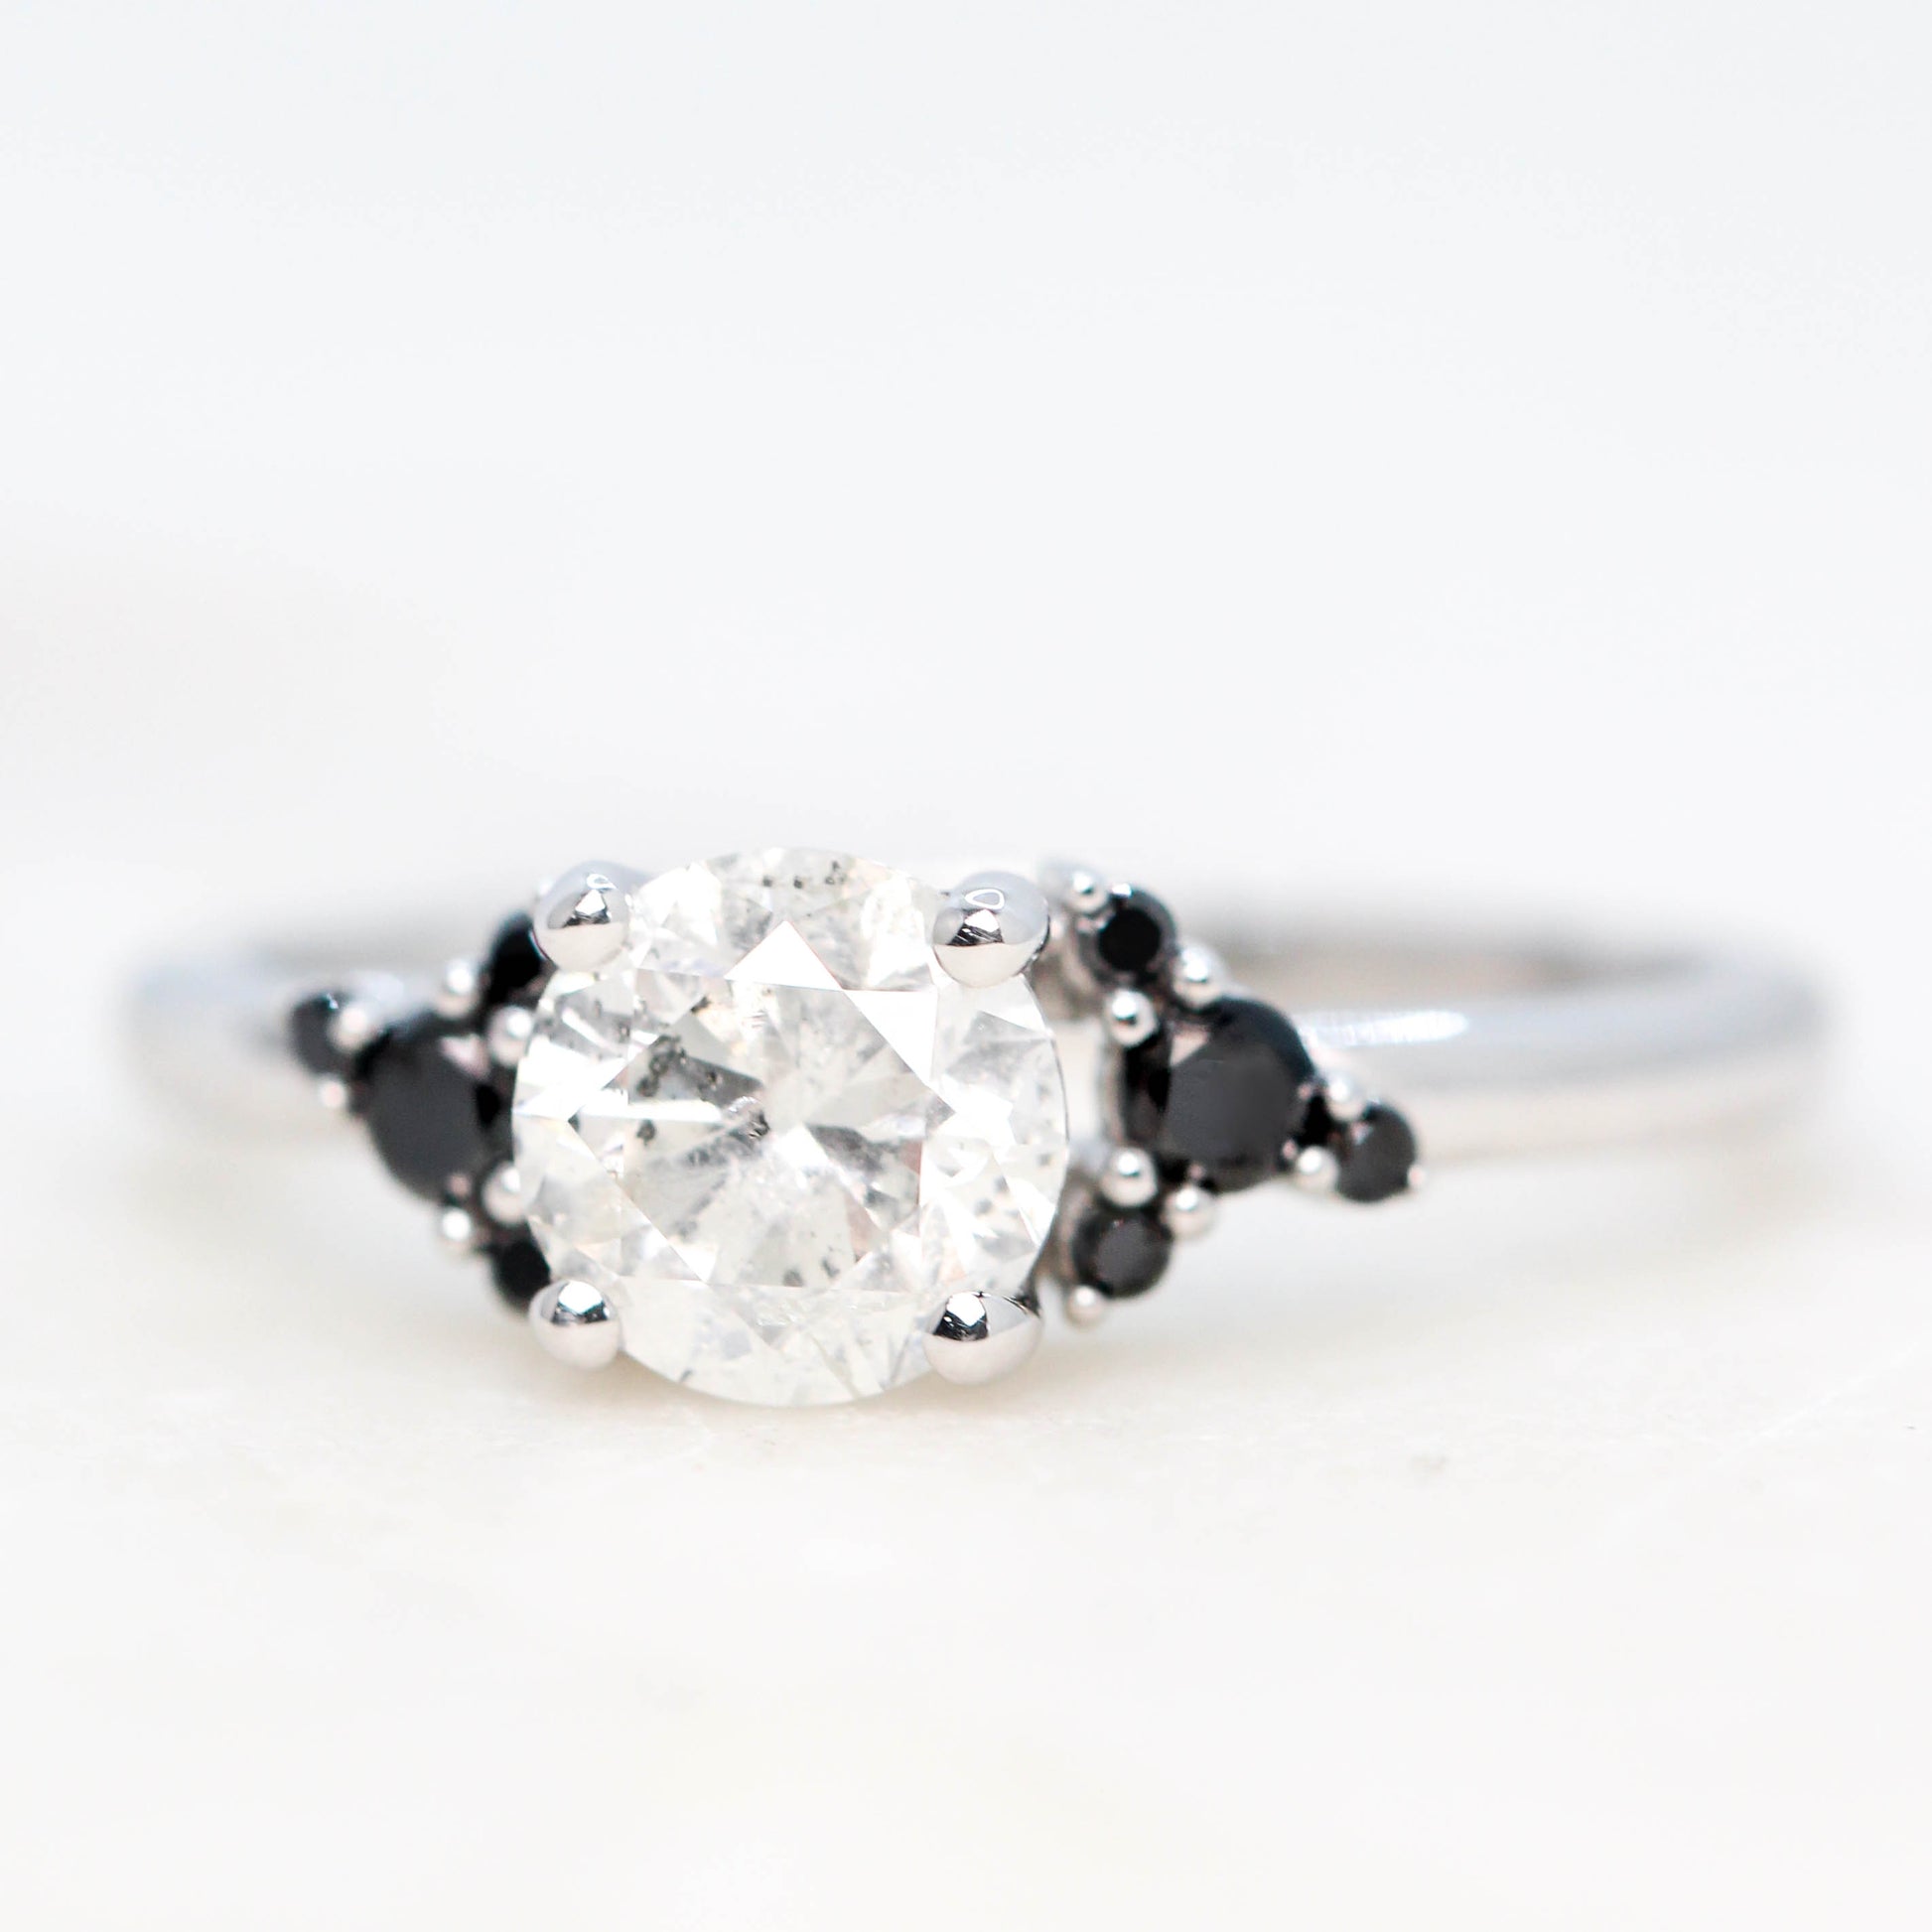 Marley Ring with a 1.01 Carat Celestial White Round Diamond and Black Accent Diamonds in 14k White Gold - Ready to Size and Ship - Midwinter Co. Alternative Bridal Rings and Modern Fine Jewelry